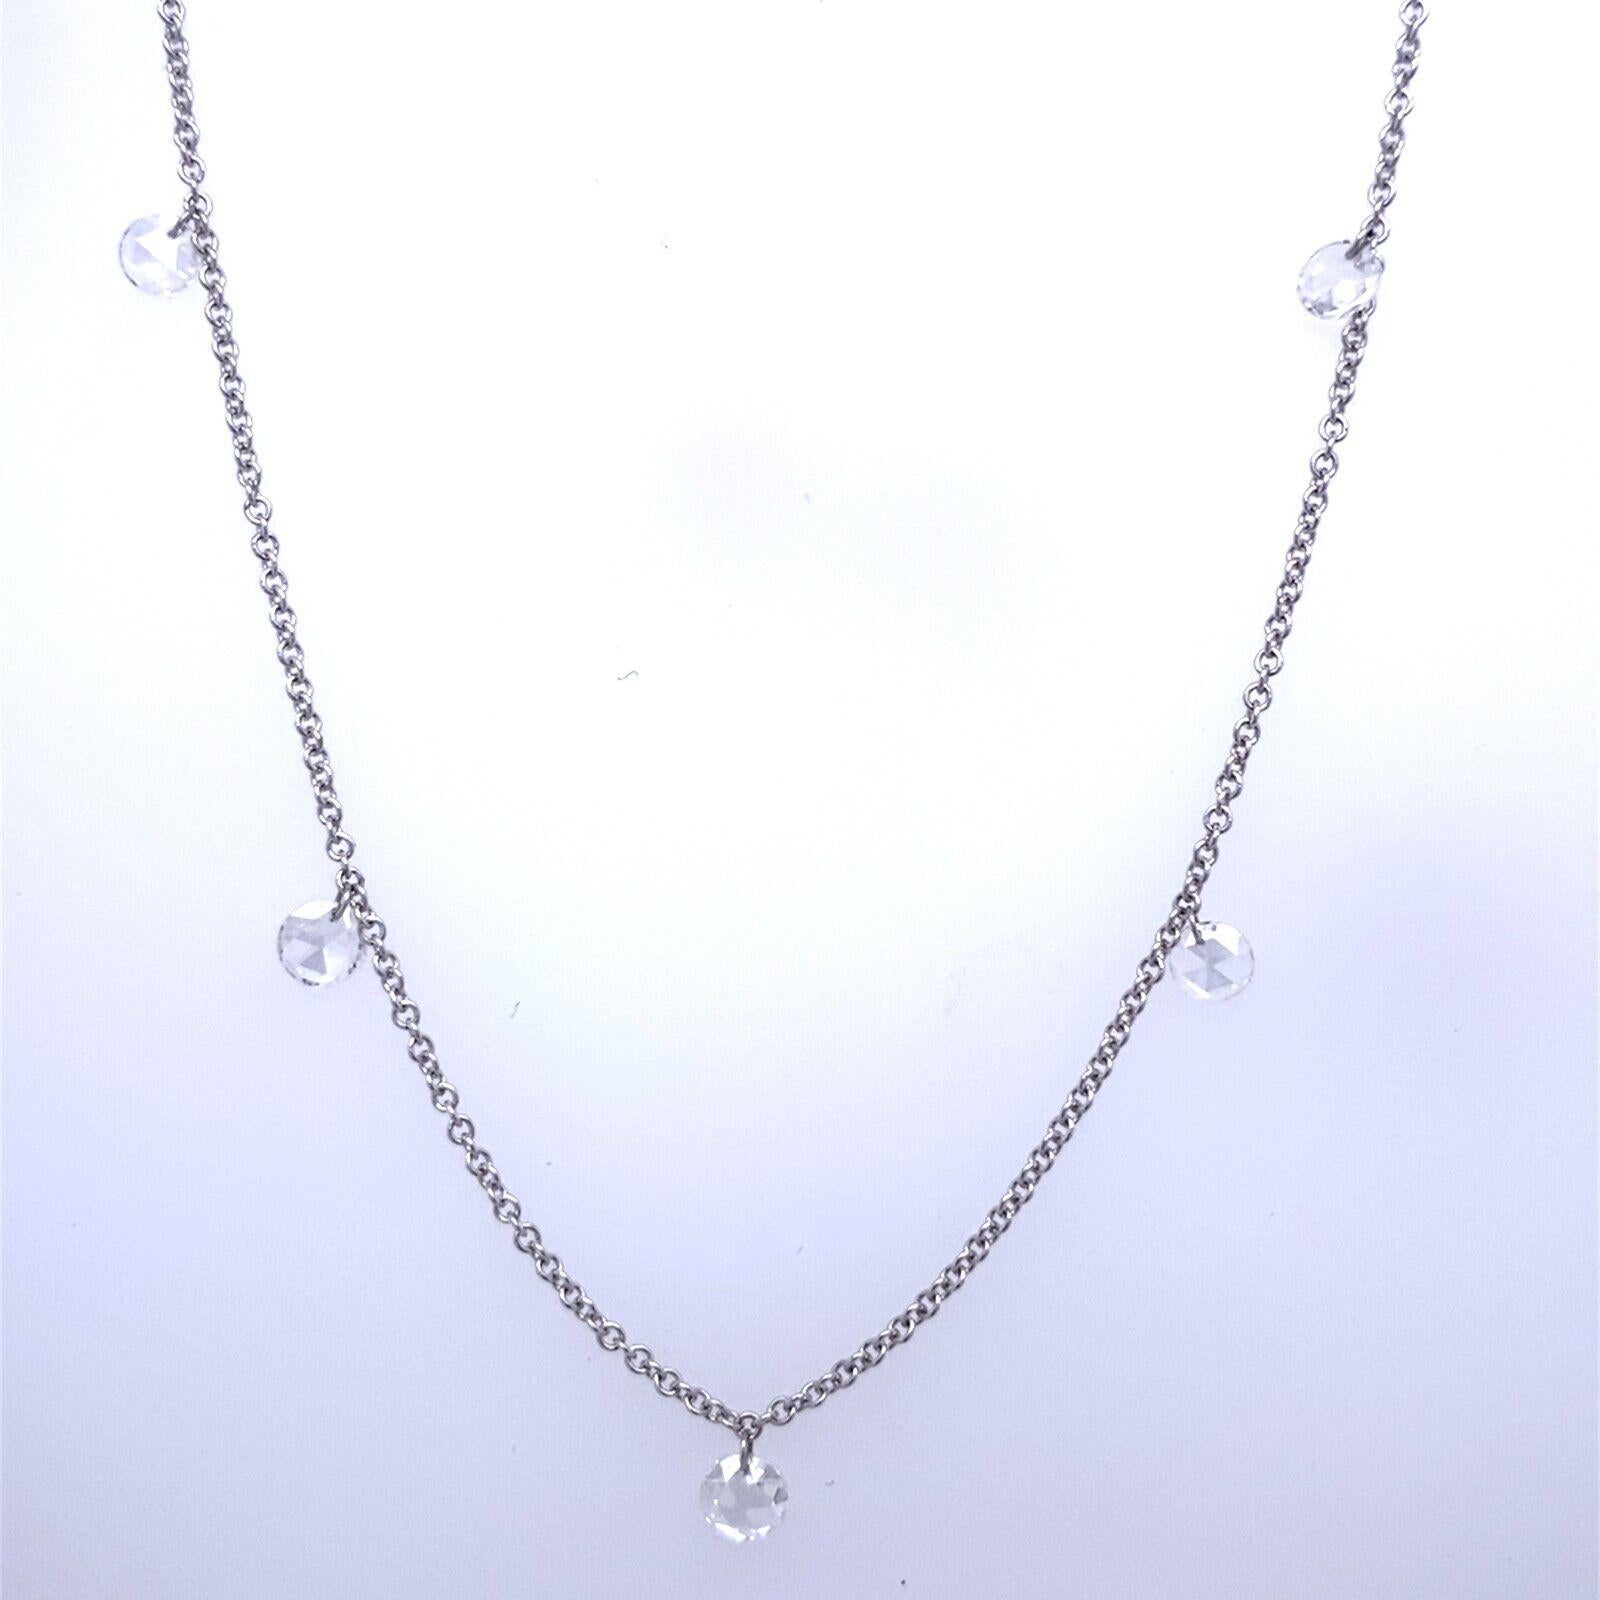 laser drilled diamond necklace